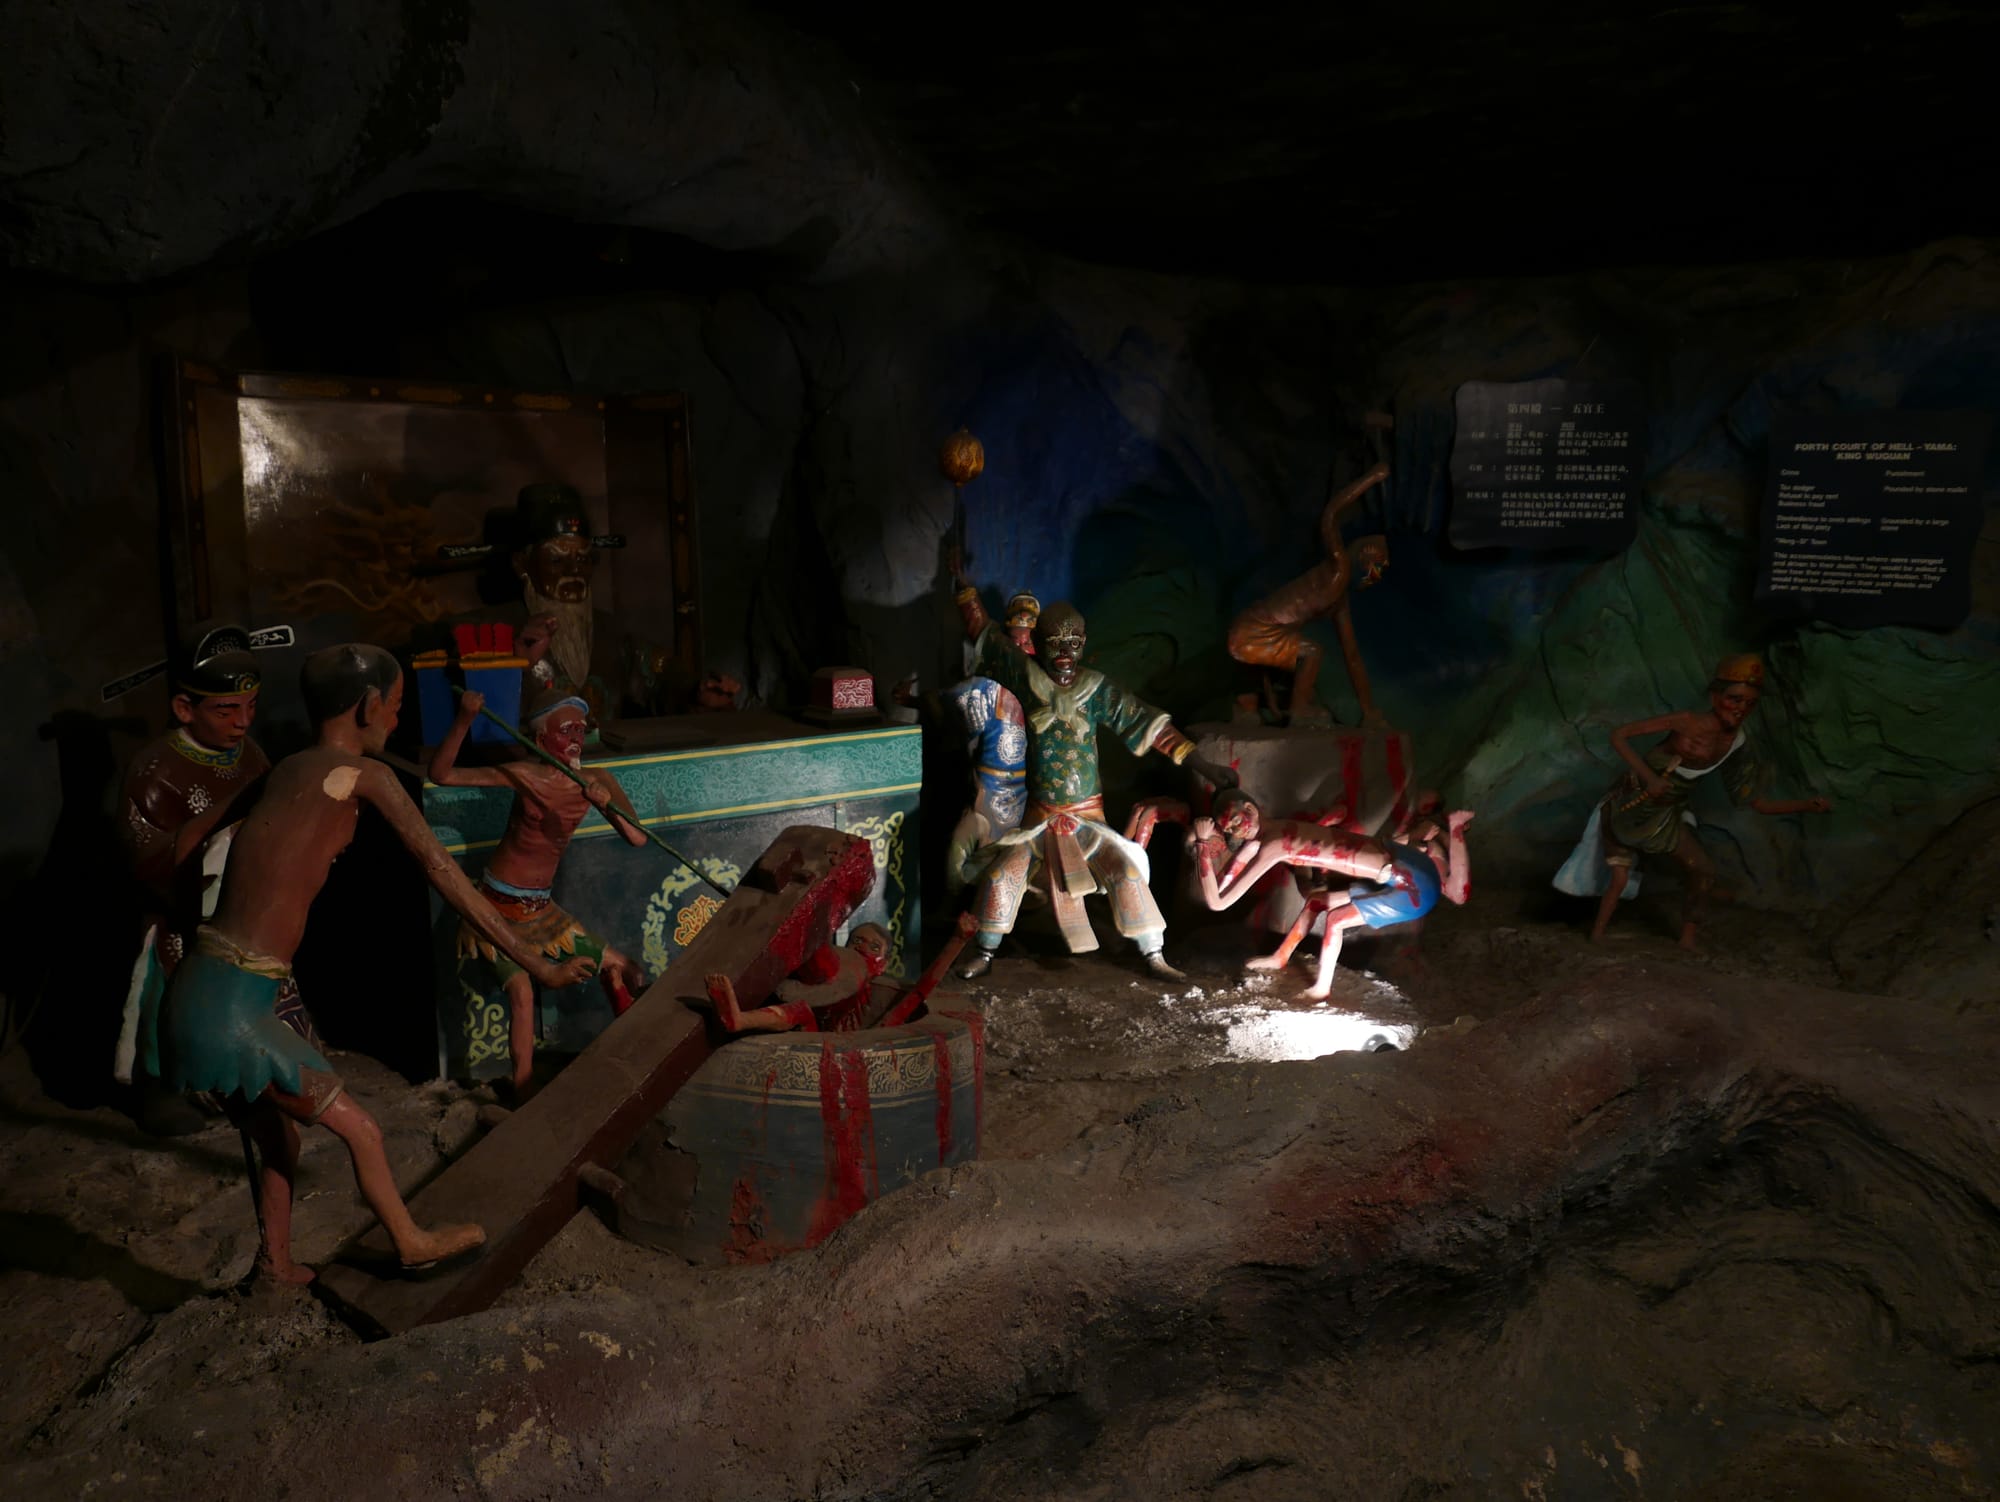 Photo by Author — Fourth Court of Hell (King Wuguan) — 10 Courts of Hell, Haw Par Villa, Singapore